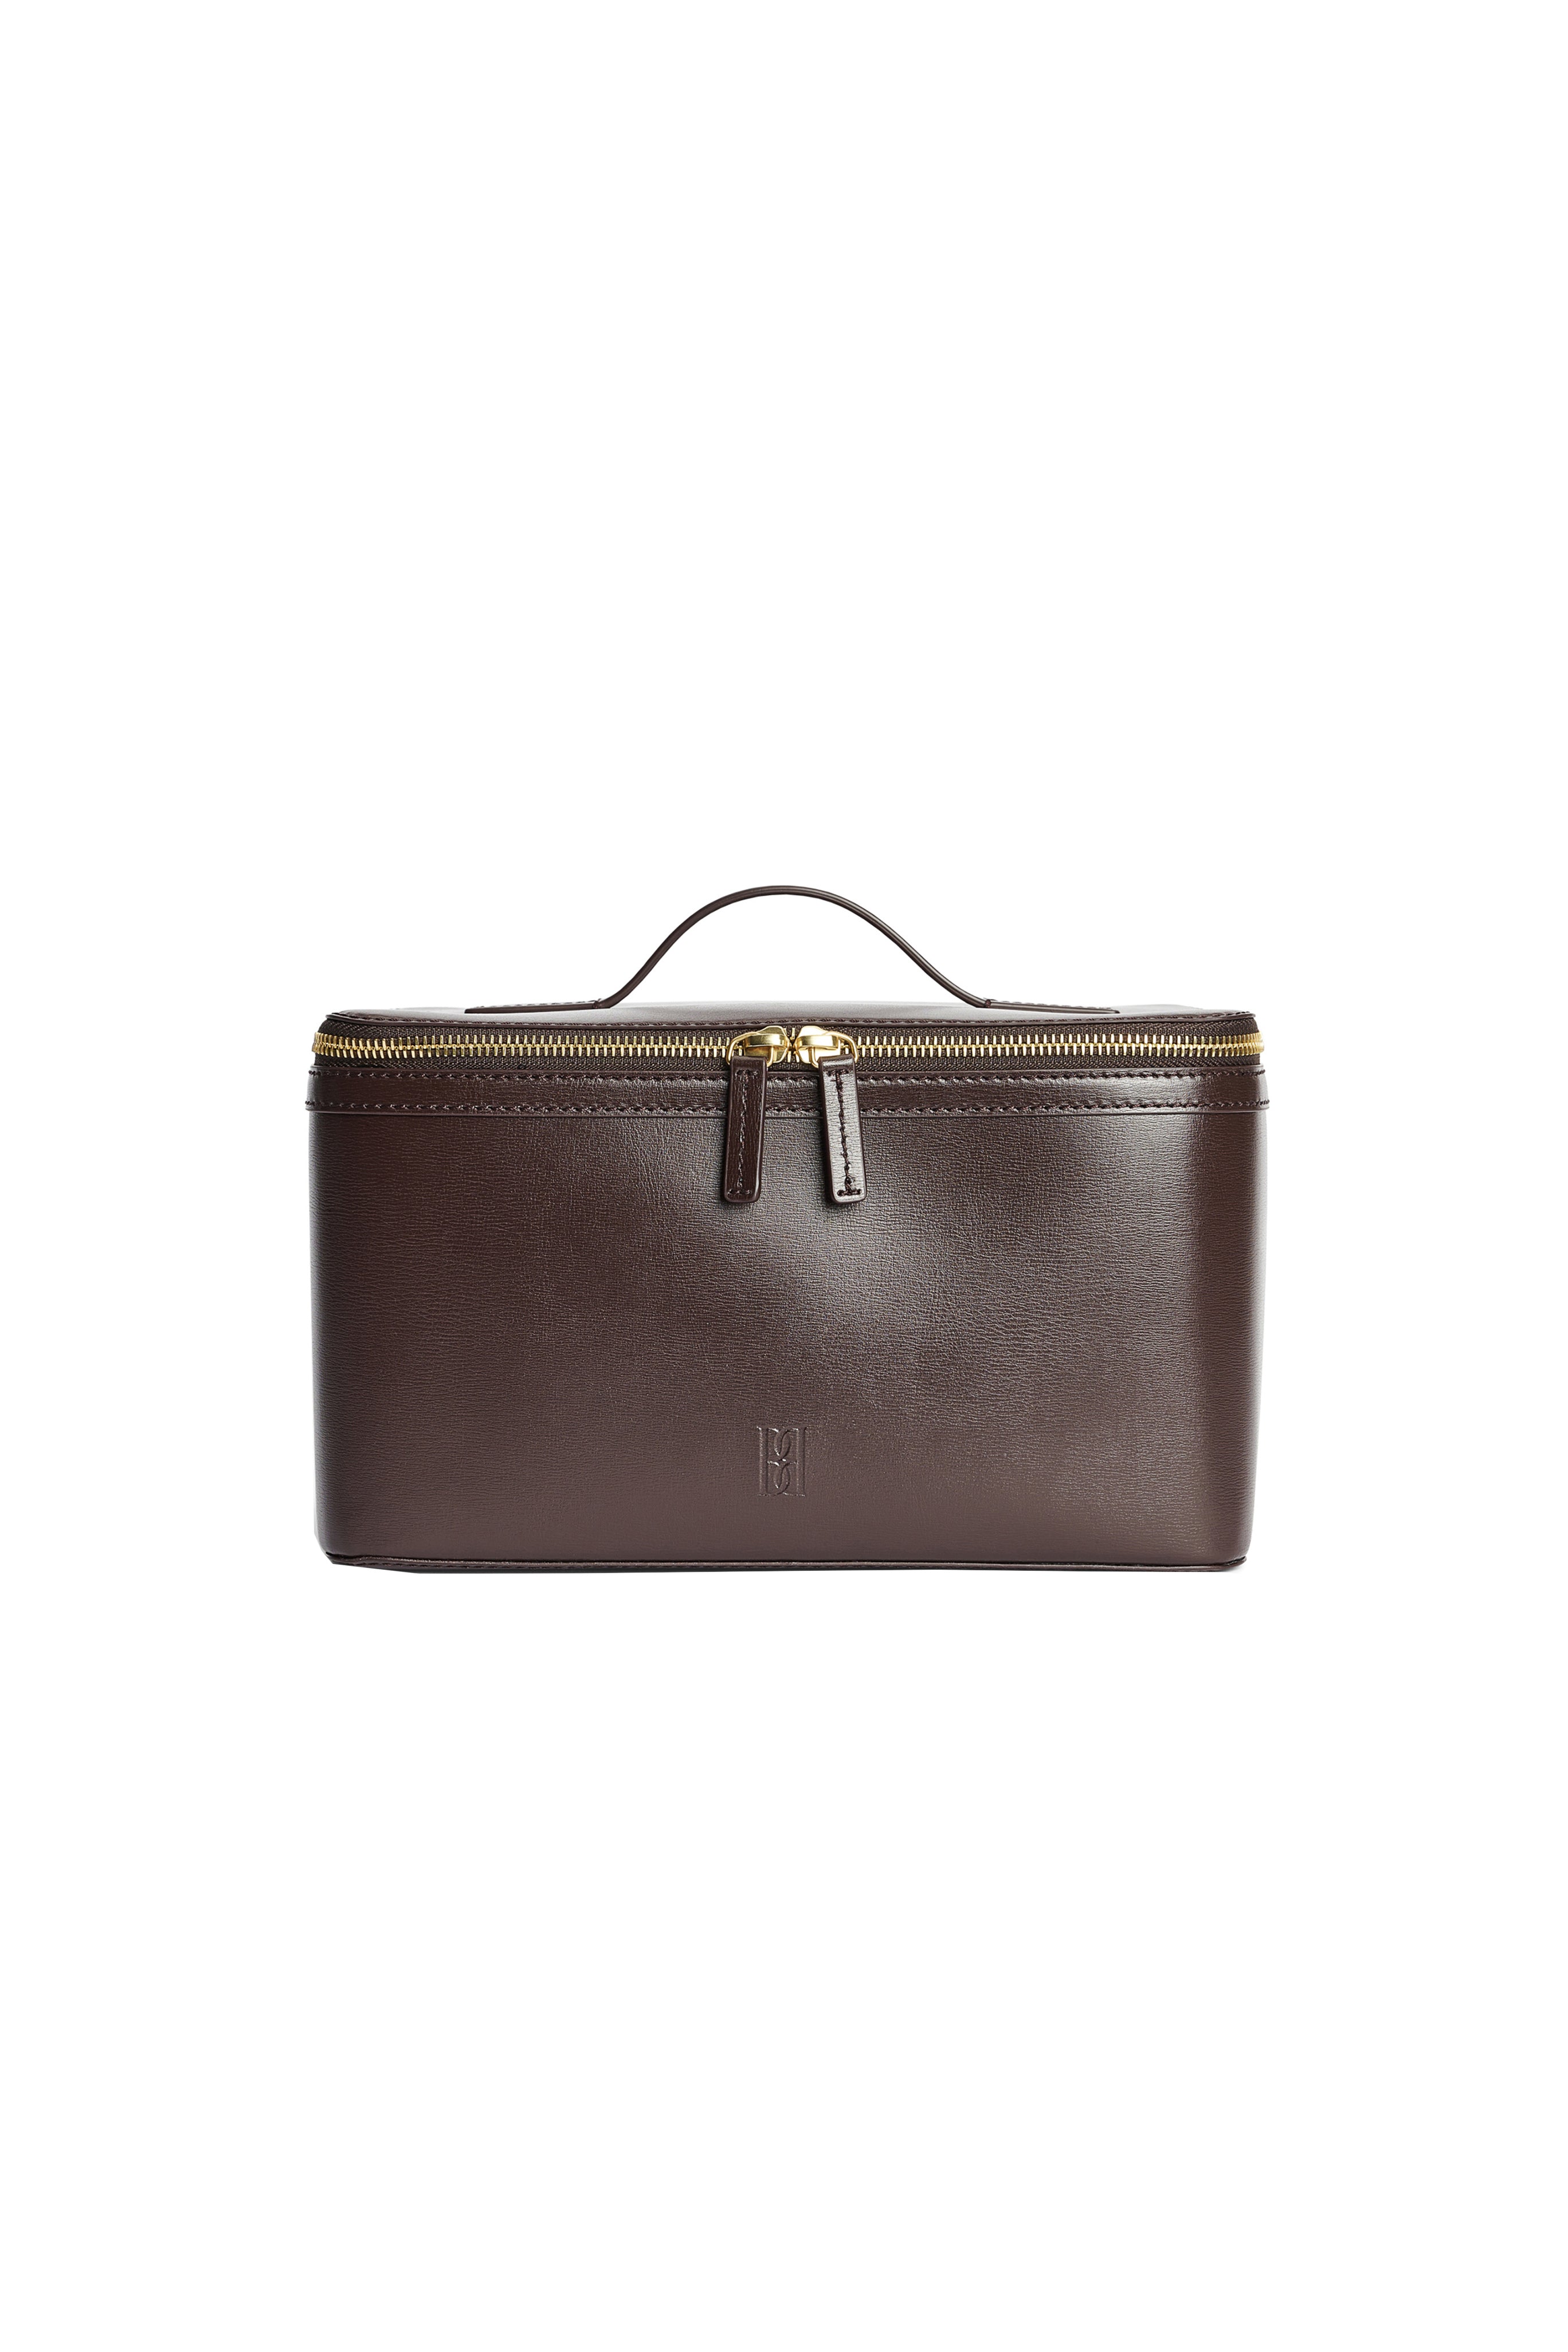 BY MALENE BIRGER Aya Brown Leather Beauty Travel Case